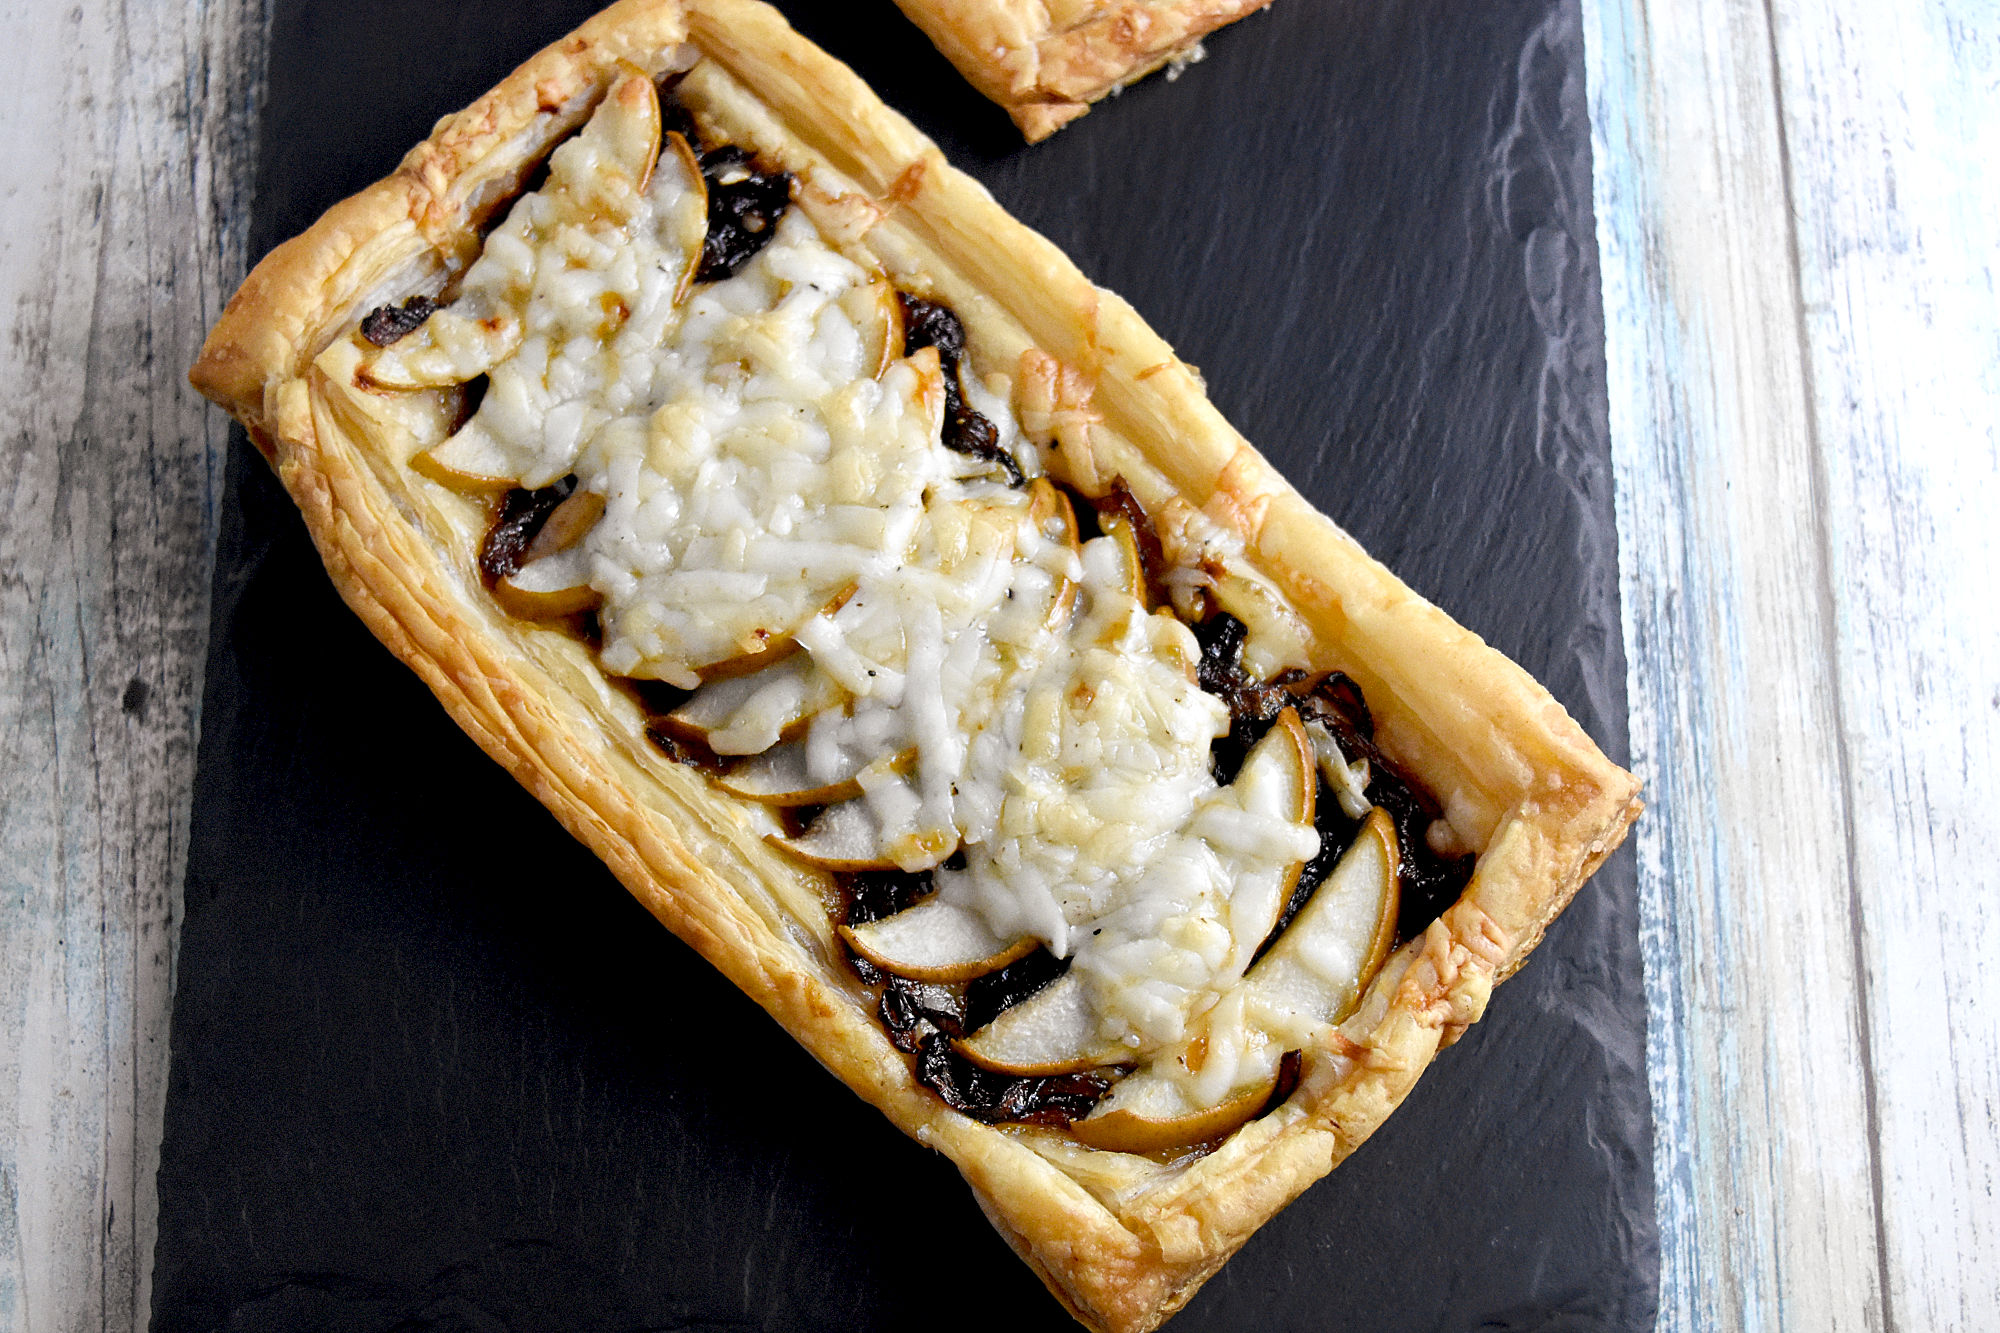 Caramelized Onion and Pear Tart